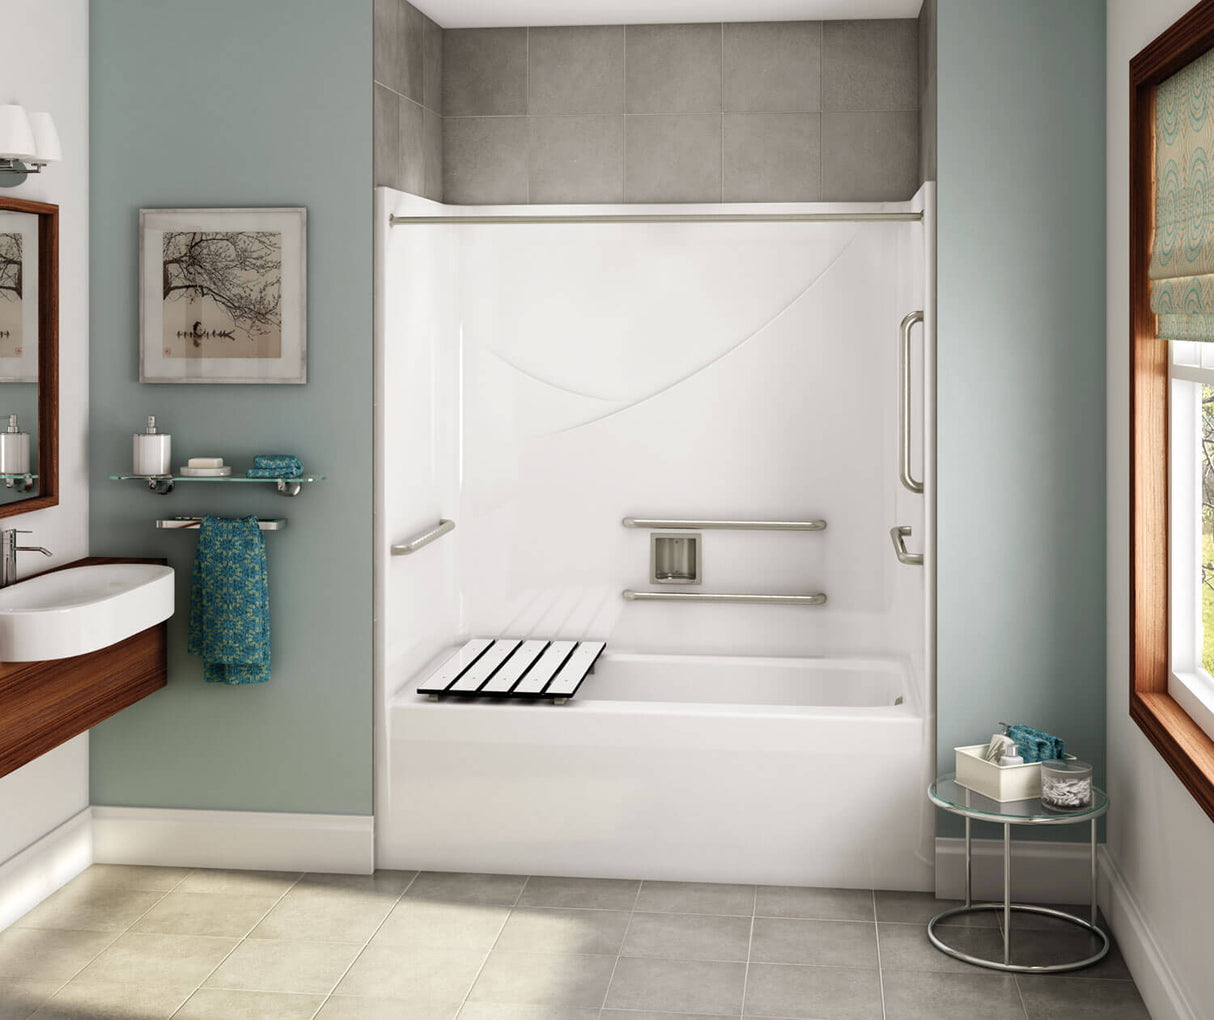 Aker OPTS-6032 AcrylX Alcove Left-Hand Drain One-Piece Tub Shower in Black - ANSI Grab Bars and Seat